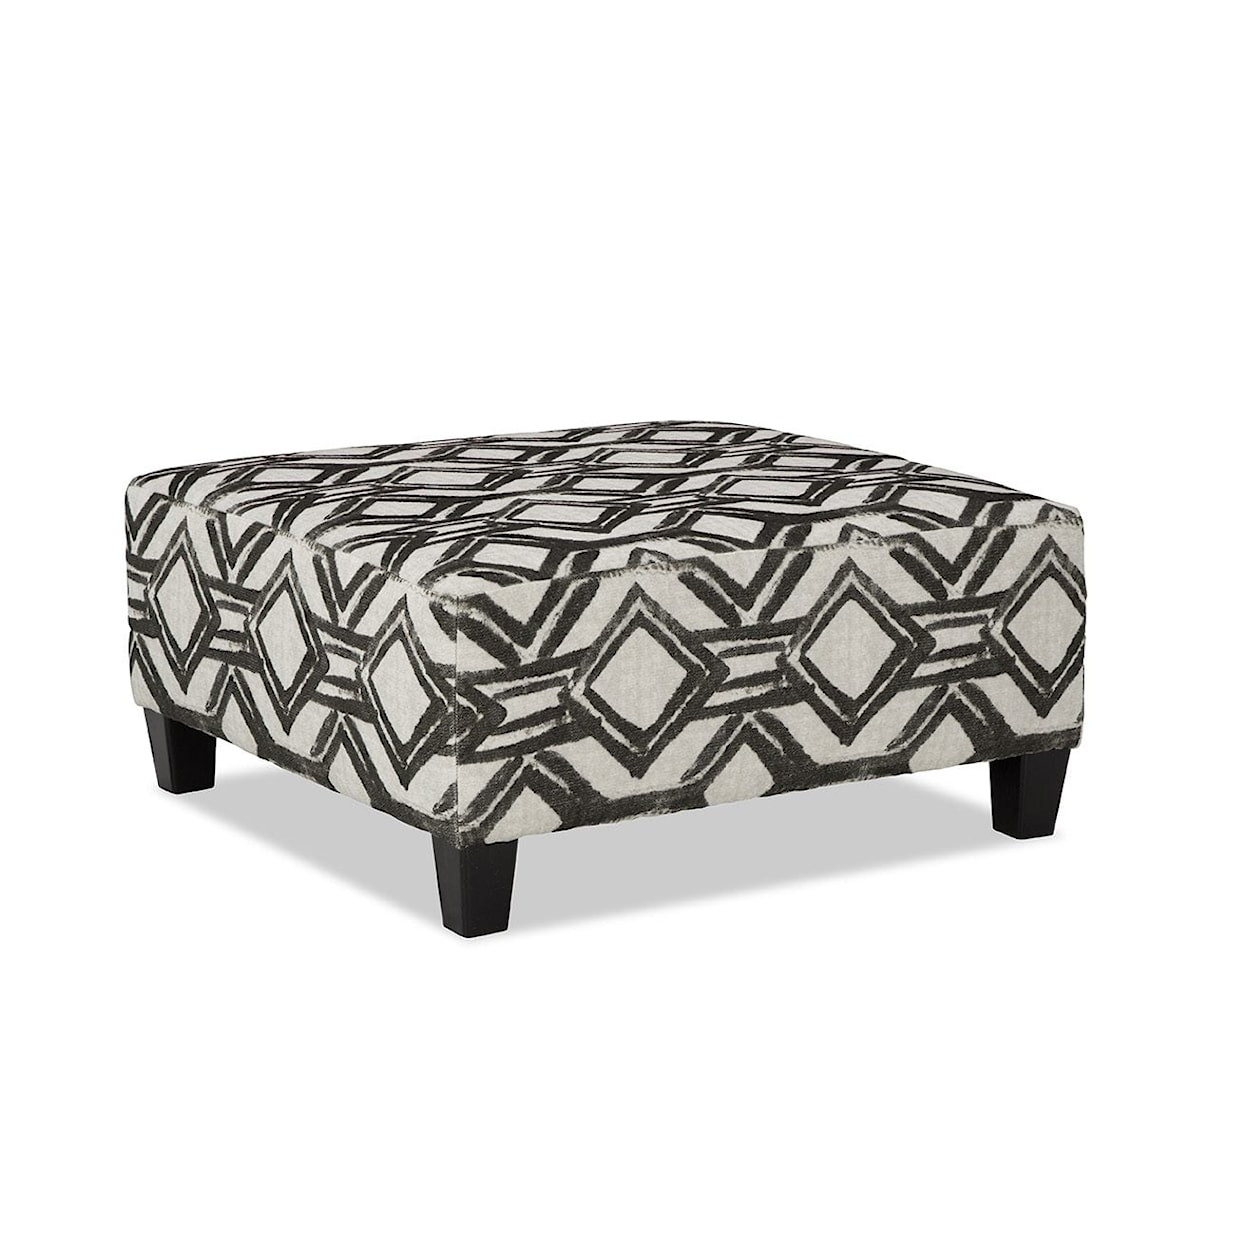 Albany 8642 Cocktail Ottoman